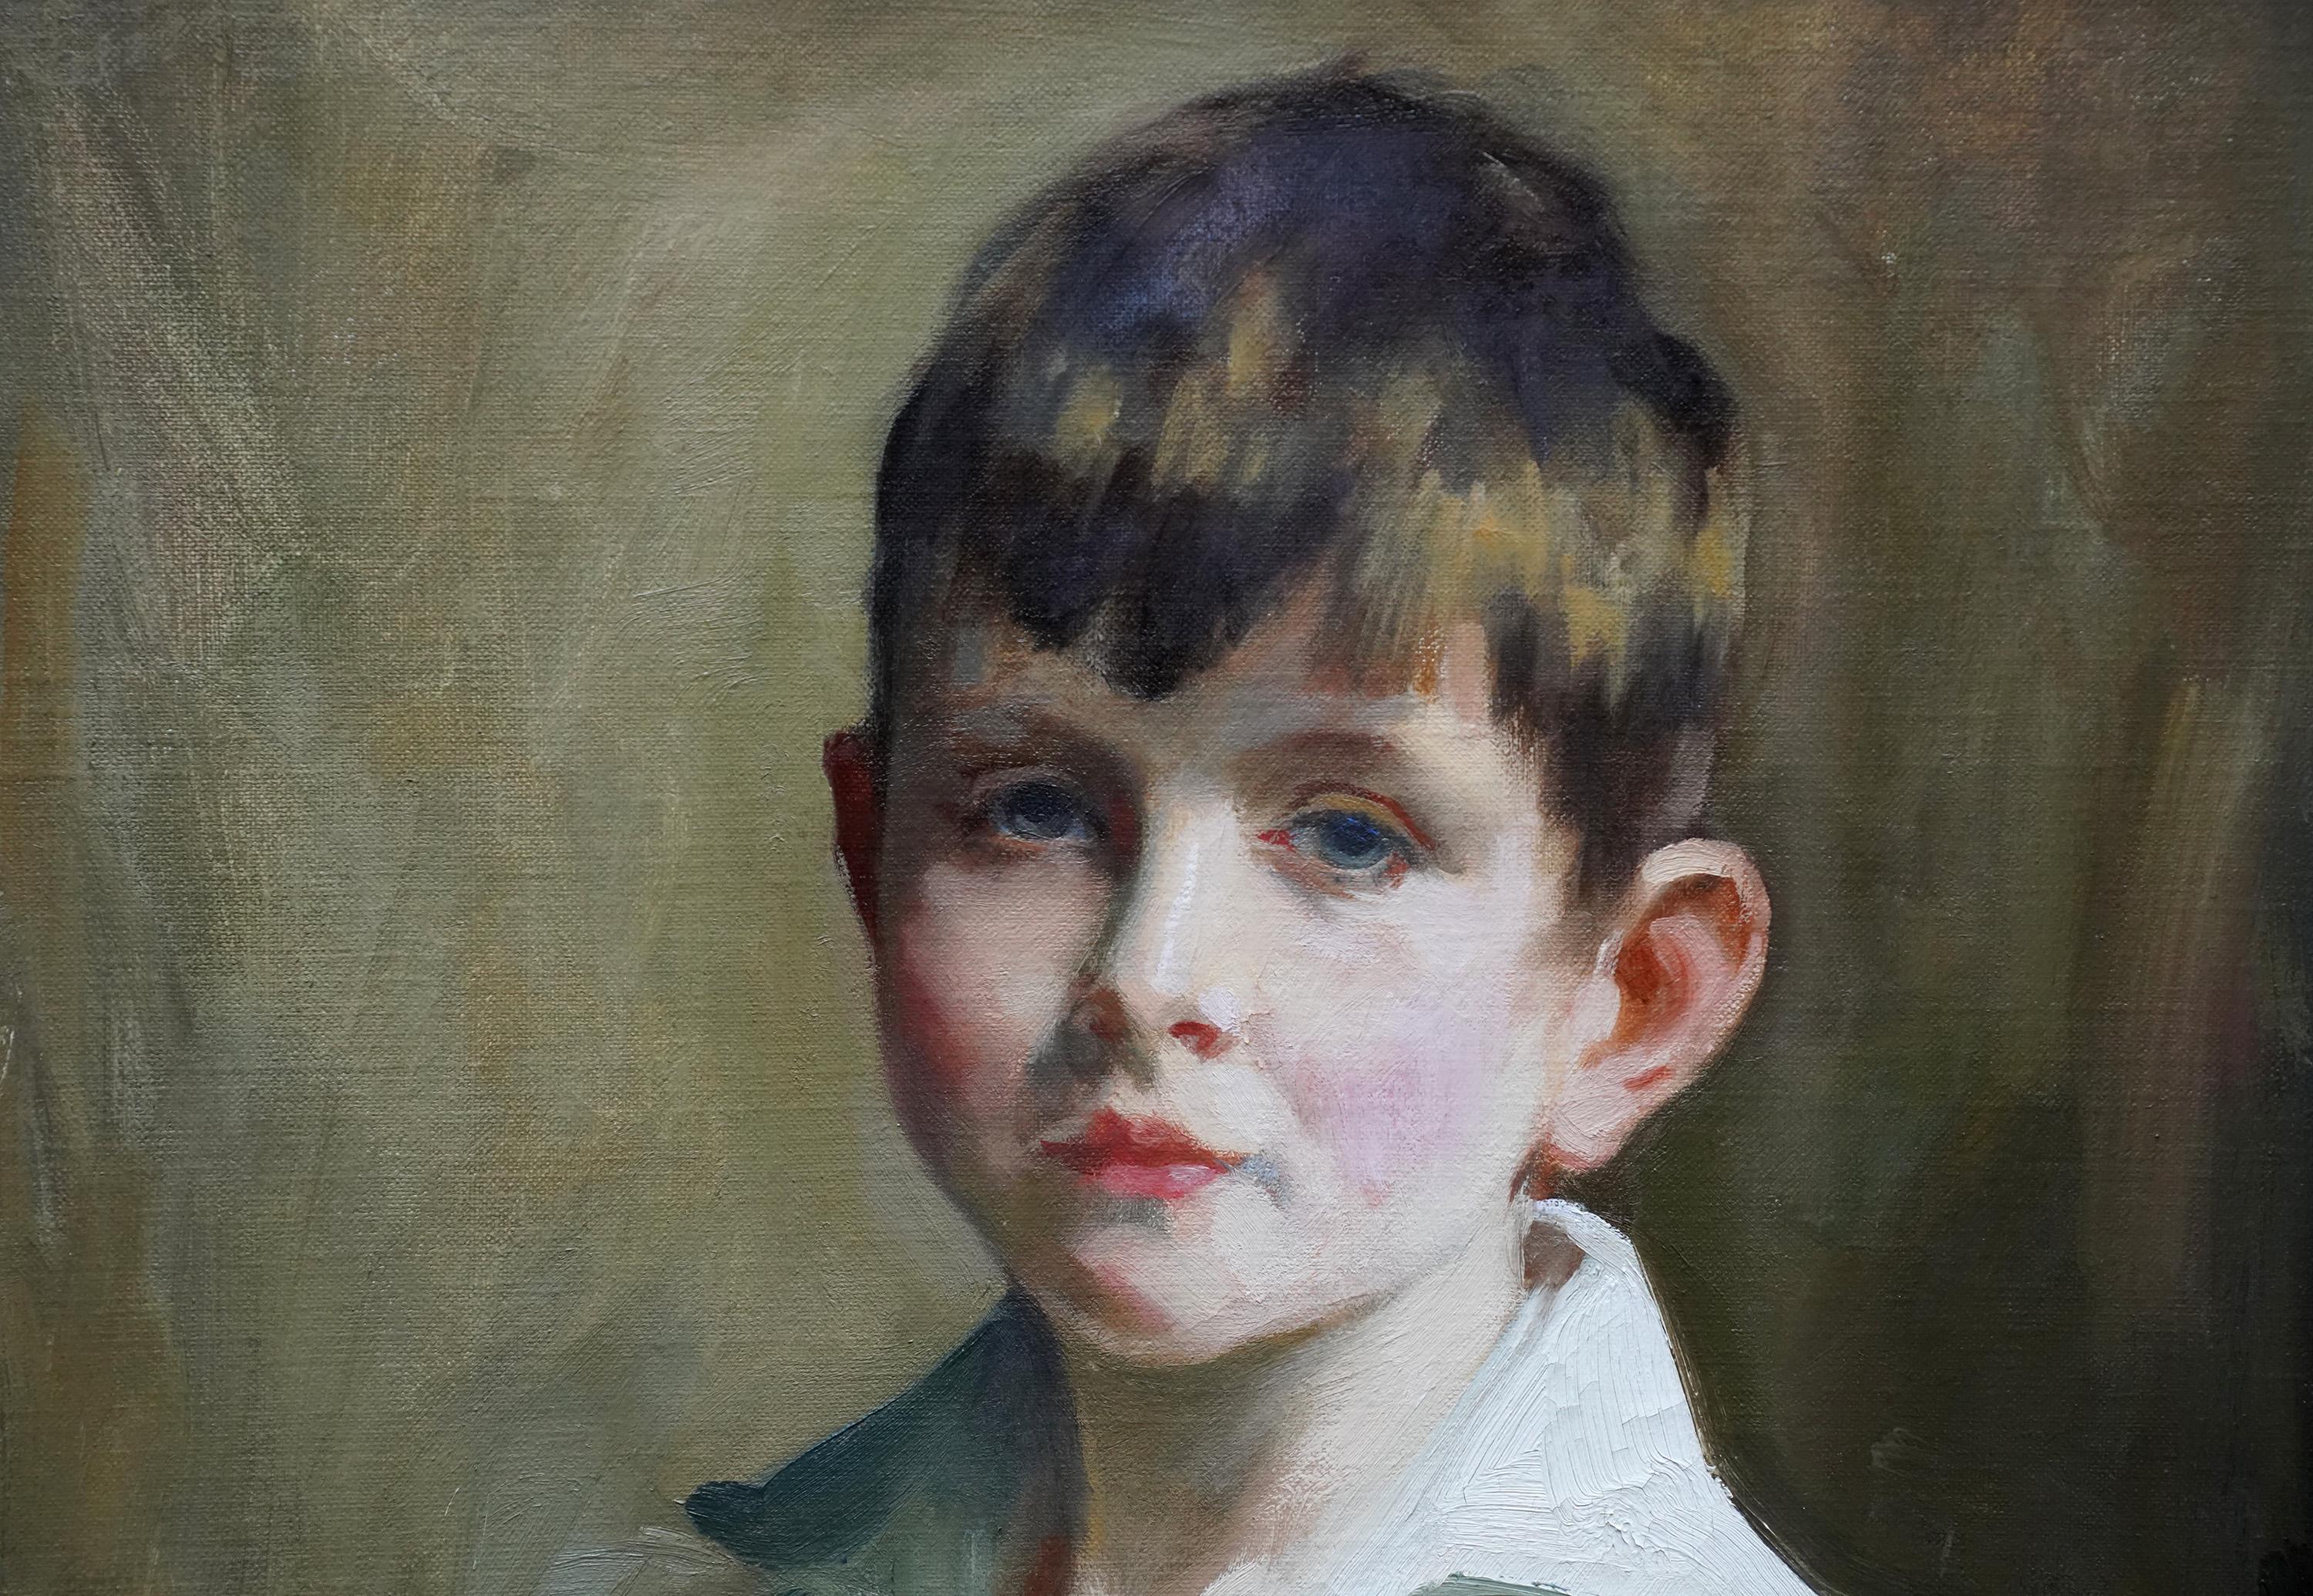 This superb Art Deco portrait oil painting is by noted Scottish artist Cowan Dobson. Painted in 1923 it is a really light and bright portrait of a young boy. The light catching his white shirt and face illuminate him beautifully as his blue eyes